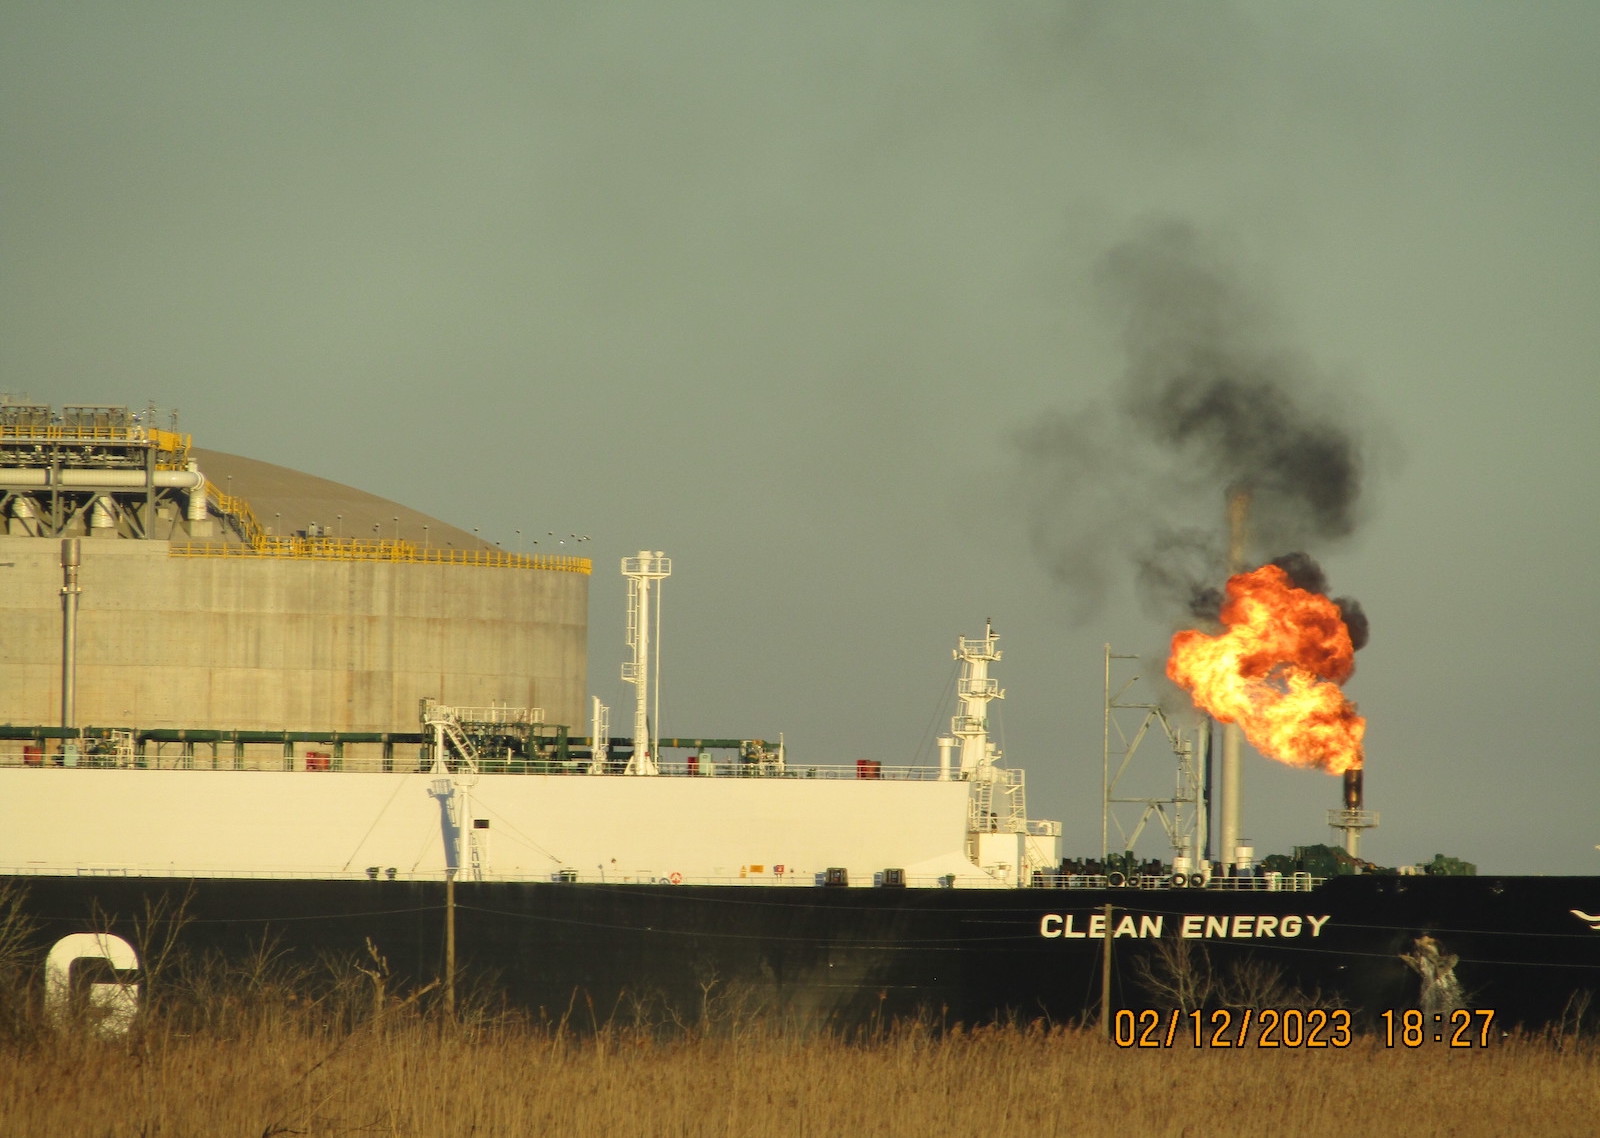 a giant fireball comes out of a stack near a ship called clean energy